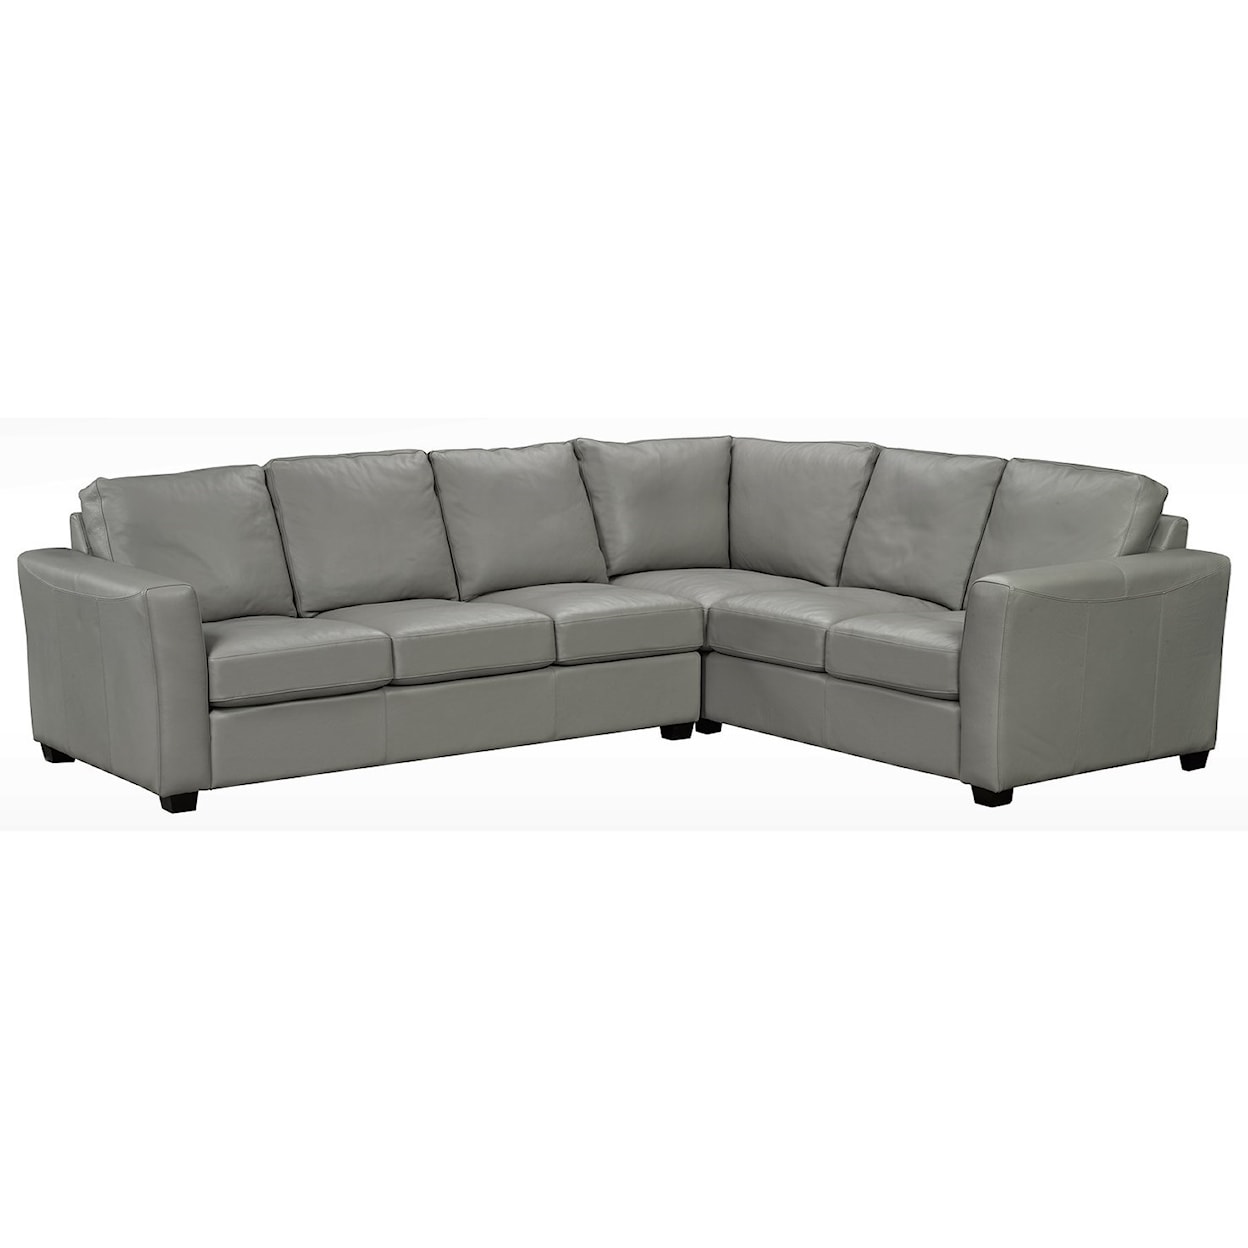 Brentwood Classics Cassidy 5 Seat Sectional